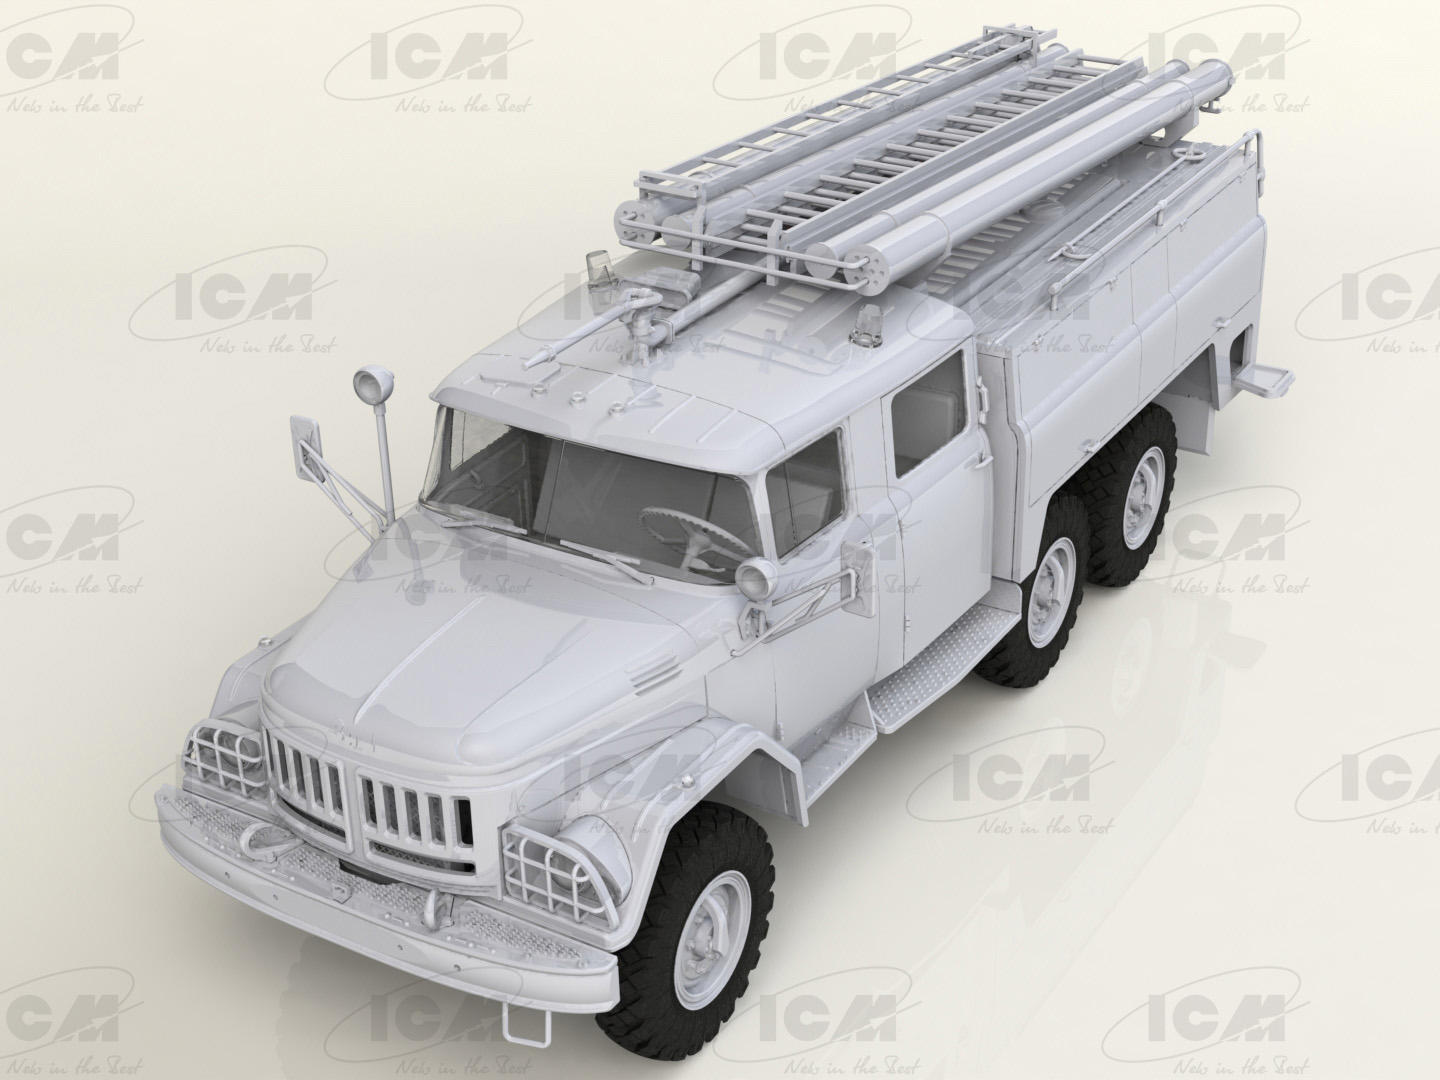 Details about   Microdisign 1/35 Soviet Fire Truck AC-40 Exterior Detail set 035387 for ICM kit 